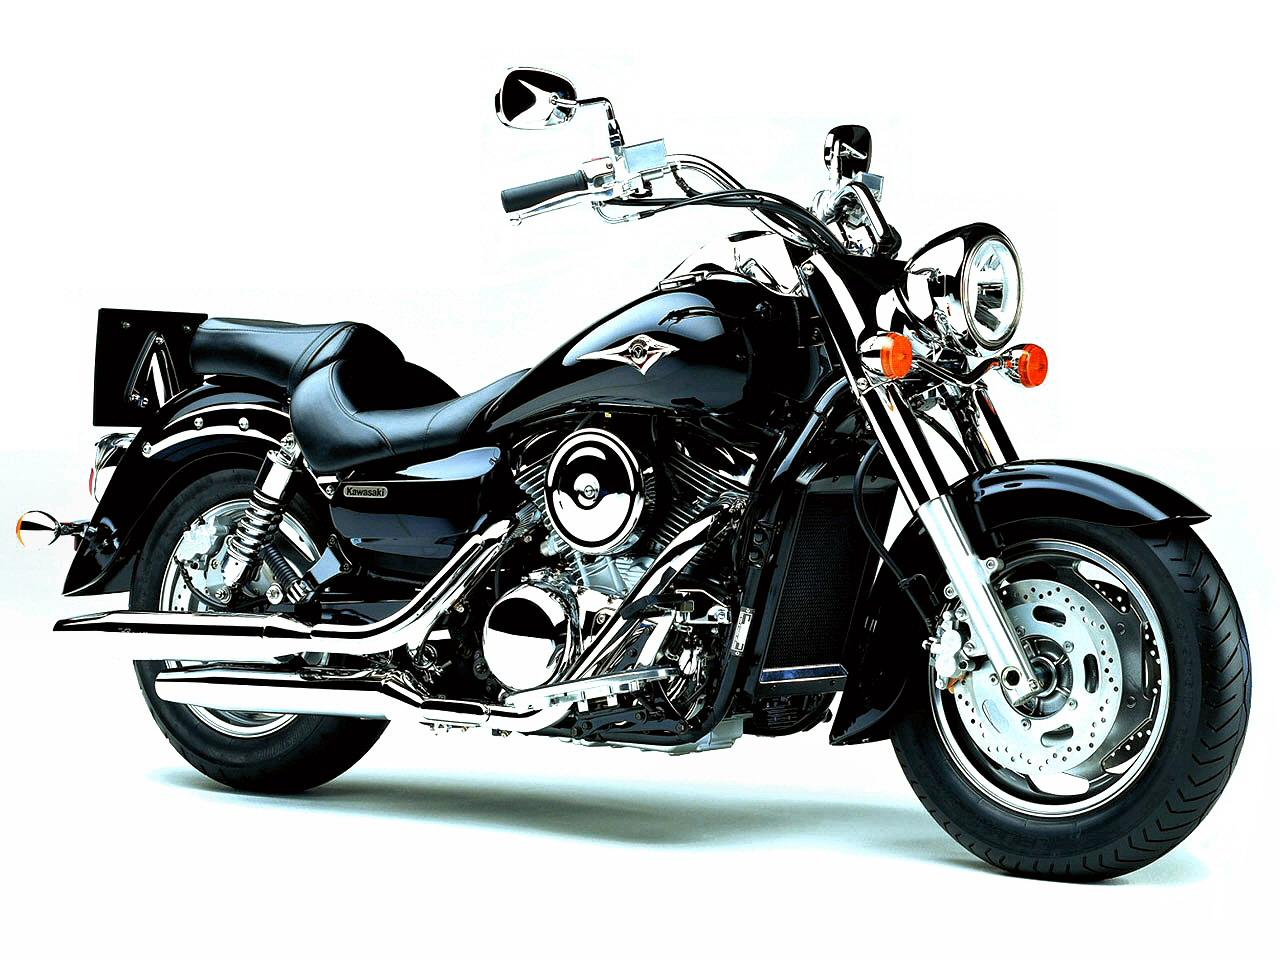 Cool Motorcycle 7714 Hd Wallpapers in Bikes   Imagescicom